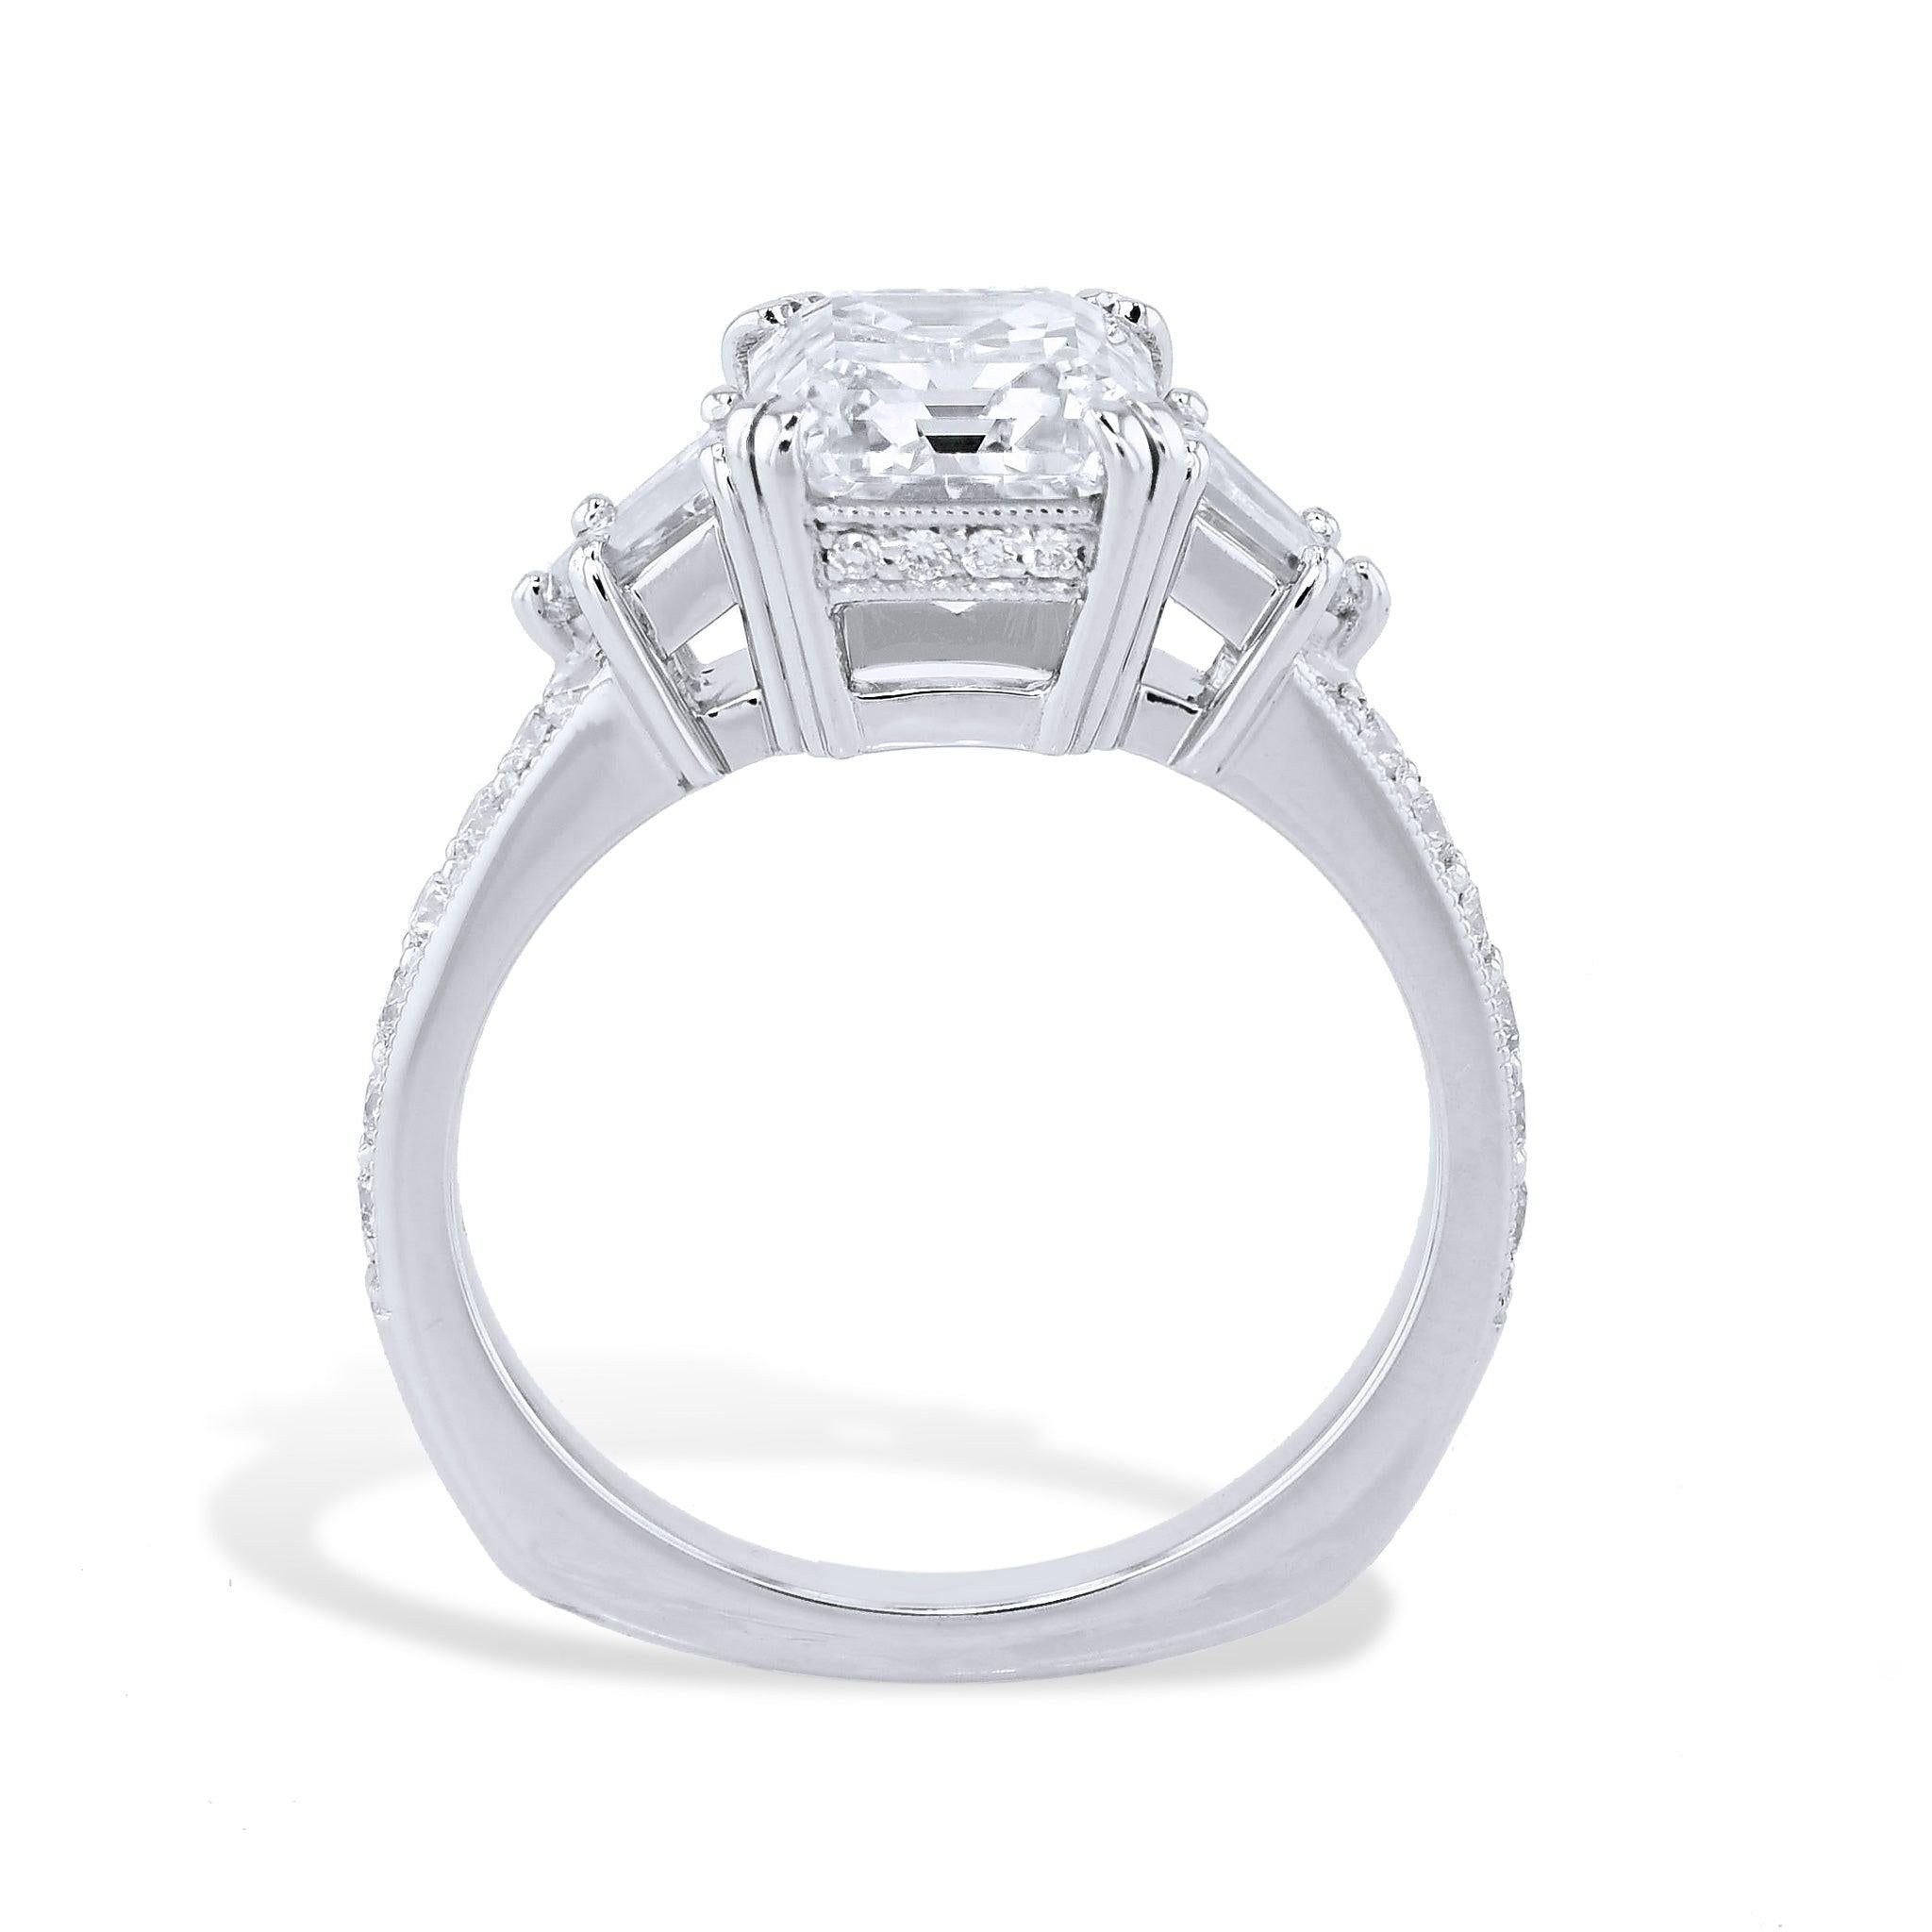 Emerald Cut Diamond Platinum Engagement Ring sets a new standard for luxury. 
Framed by 2 sparkling bullet cut baguette diamonds and 20 exquisite pave set diamonds, this masterpiece is further complemented by delightful pave diamonds that adorn the